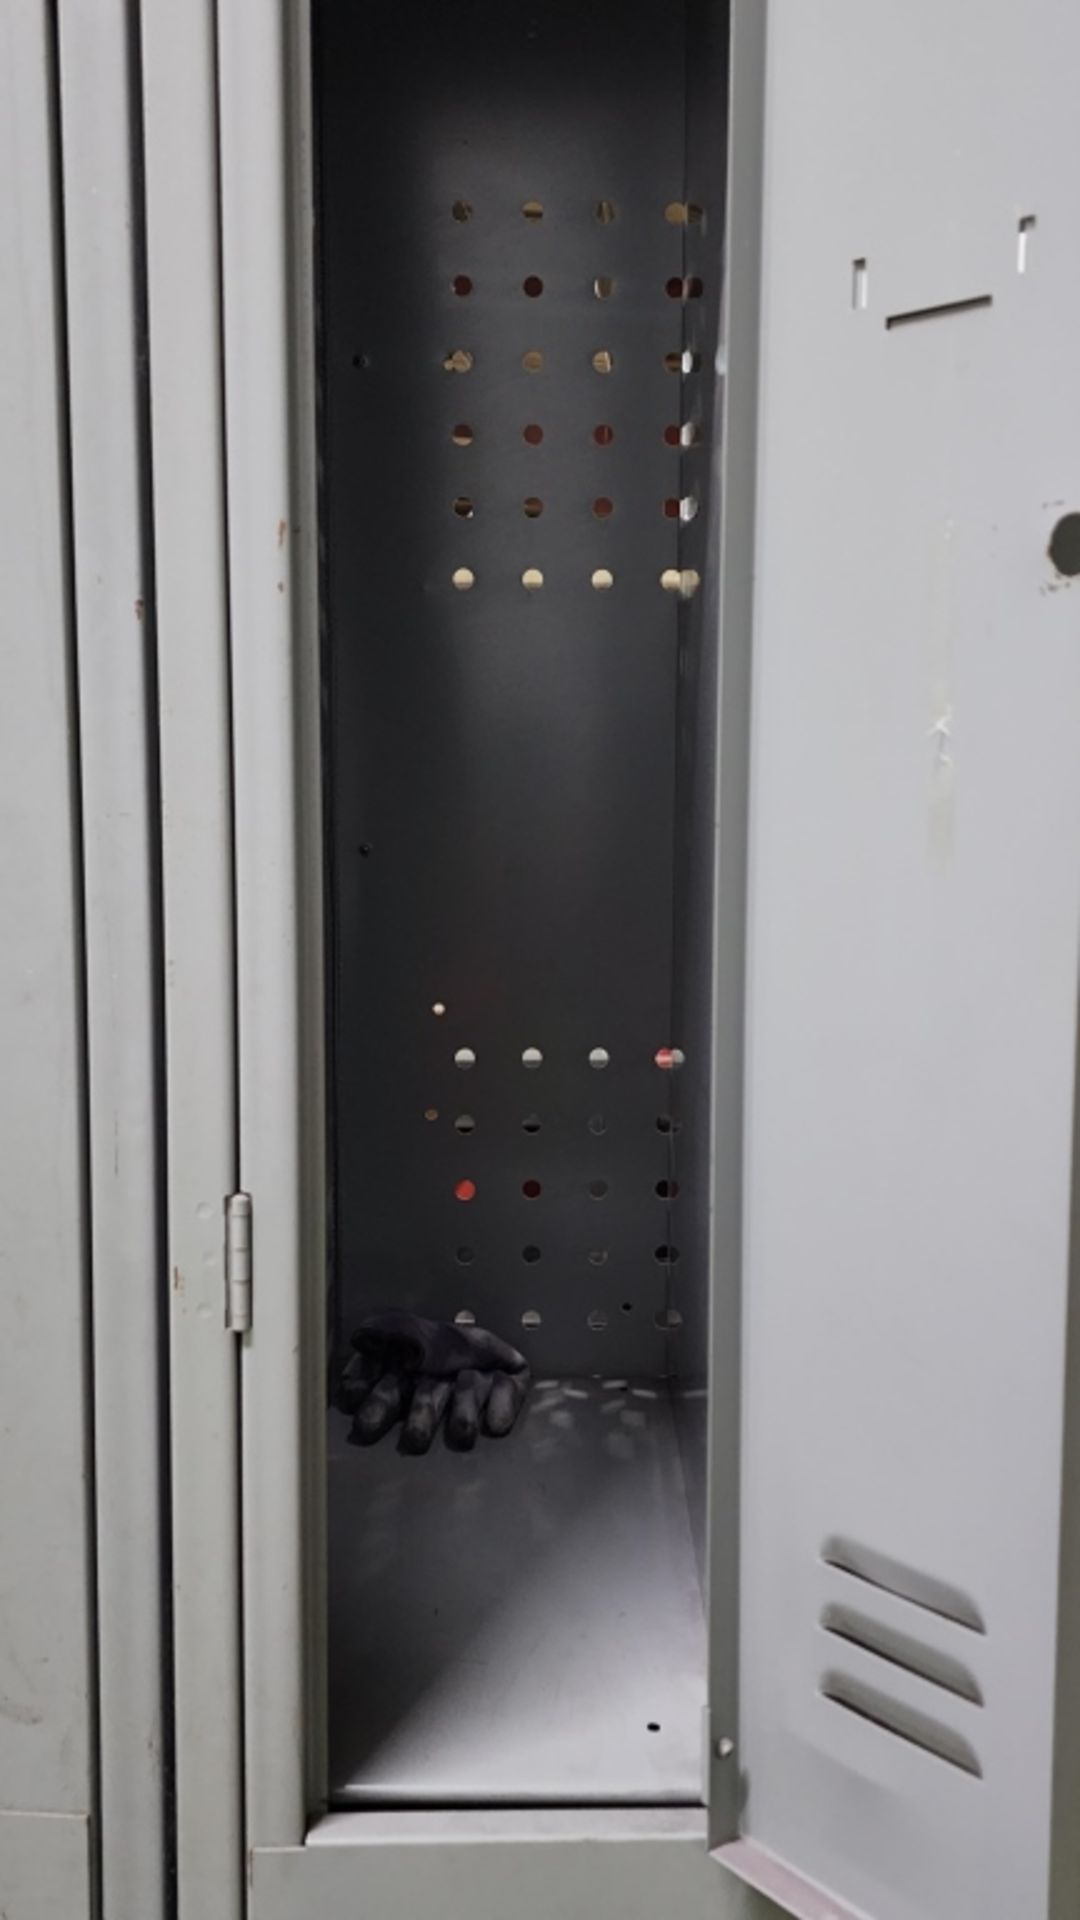 Metal Lockers 6 Sections 26" W x 21" D x 84" H - Image 3 of 3